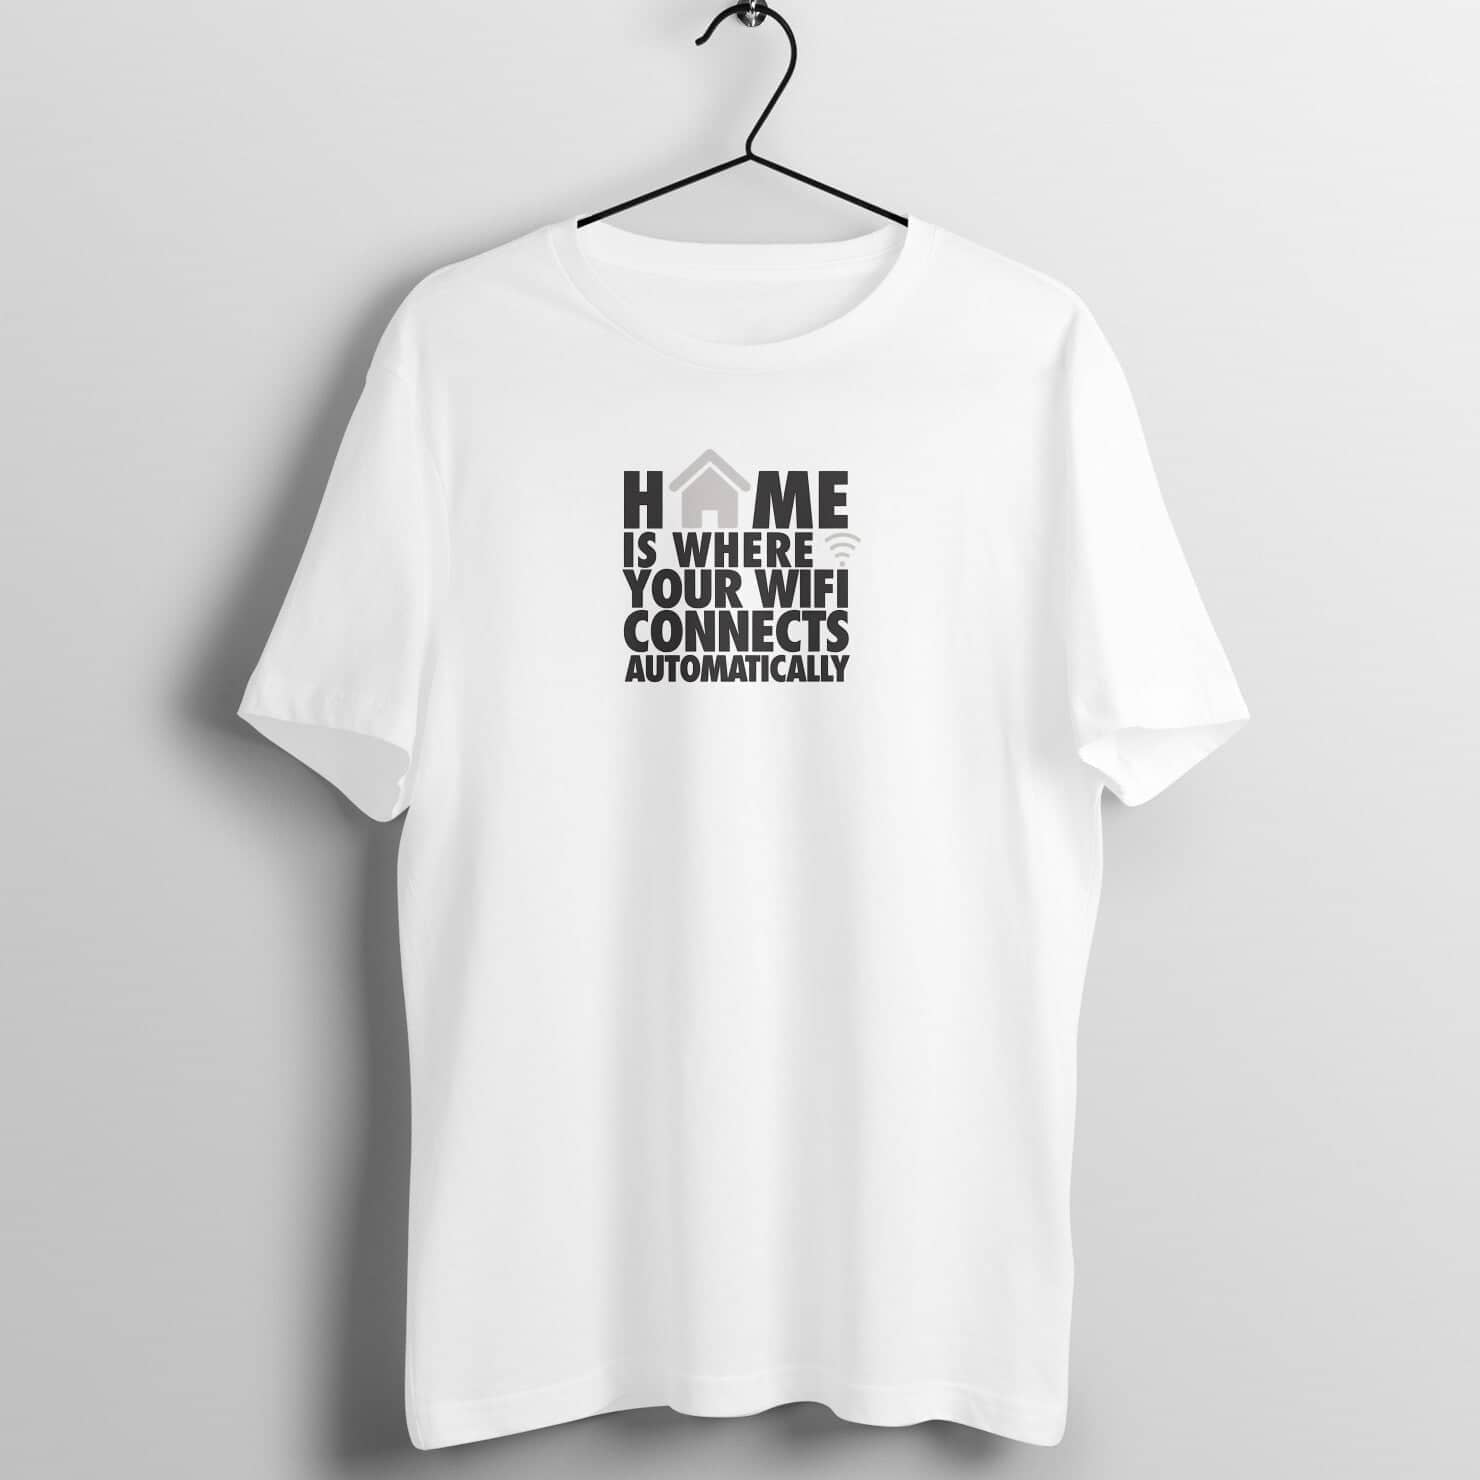 Home is Where Wifi Connects Automatically Funny White T Shirt for Men and Women freeshipping - Catch My Drift India